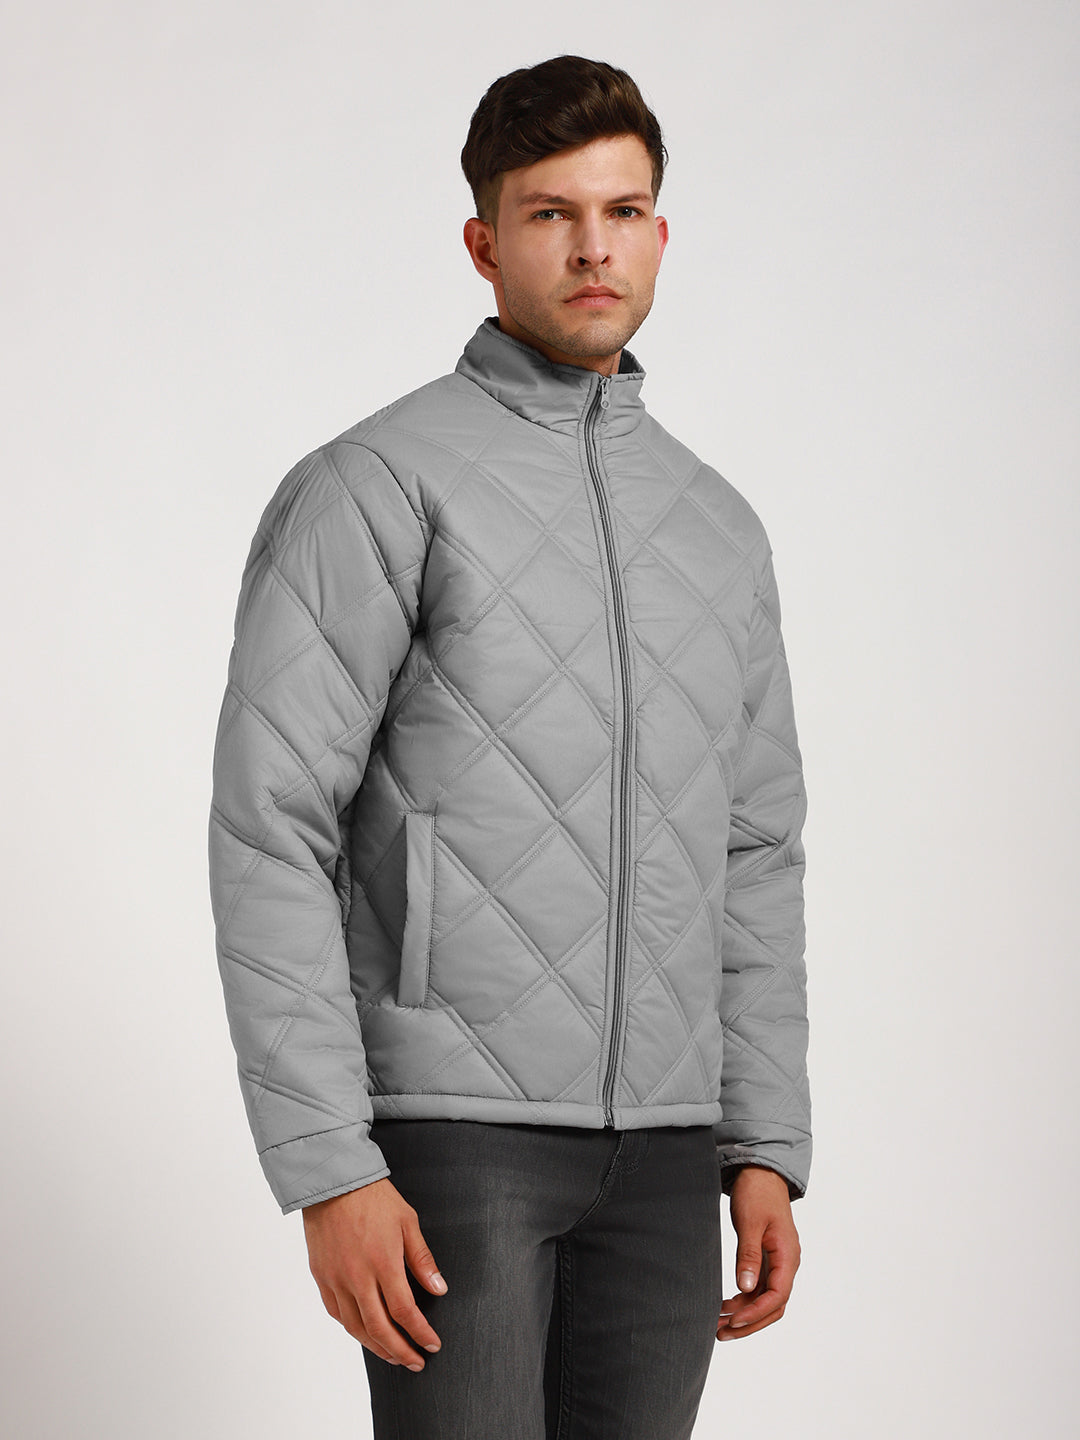 Dennis Lingo Men's Light Grey Solid Quilted High Neck Full Sleeve Puffer W/O hood Jackets